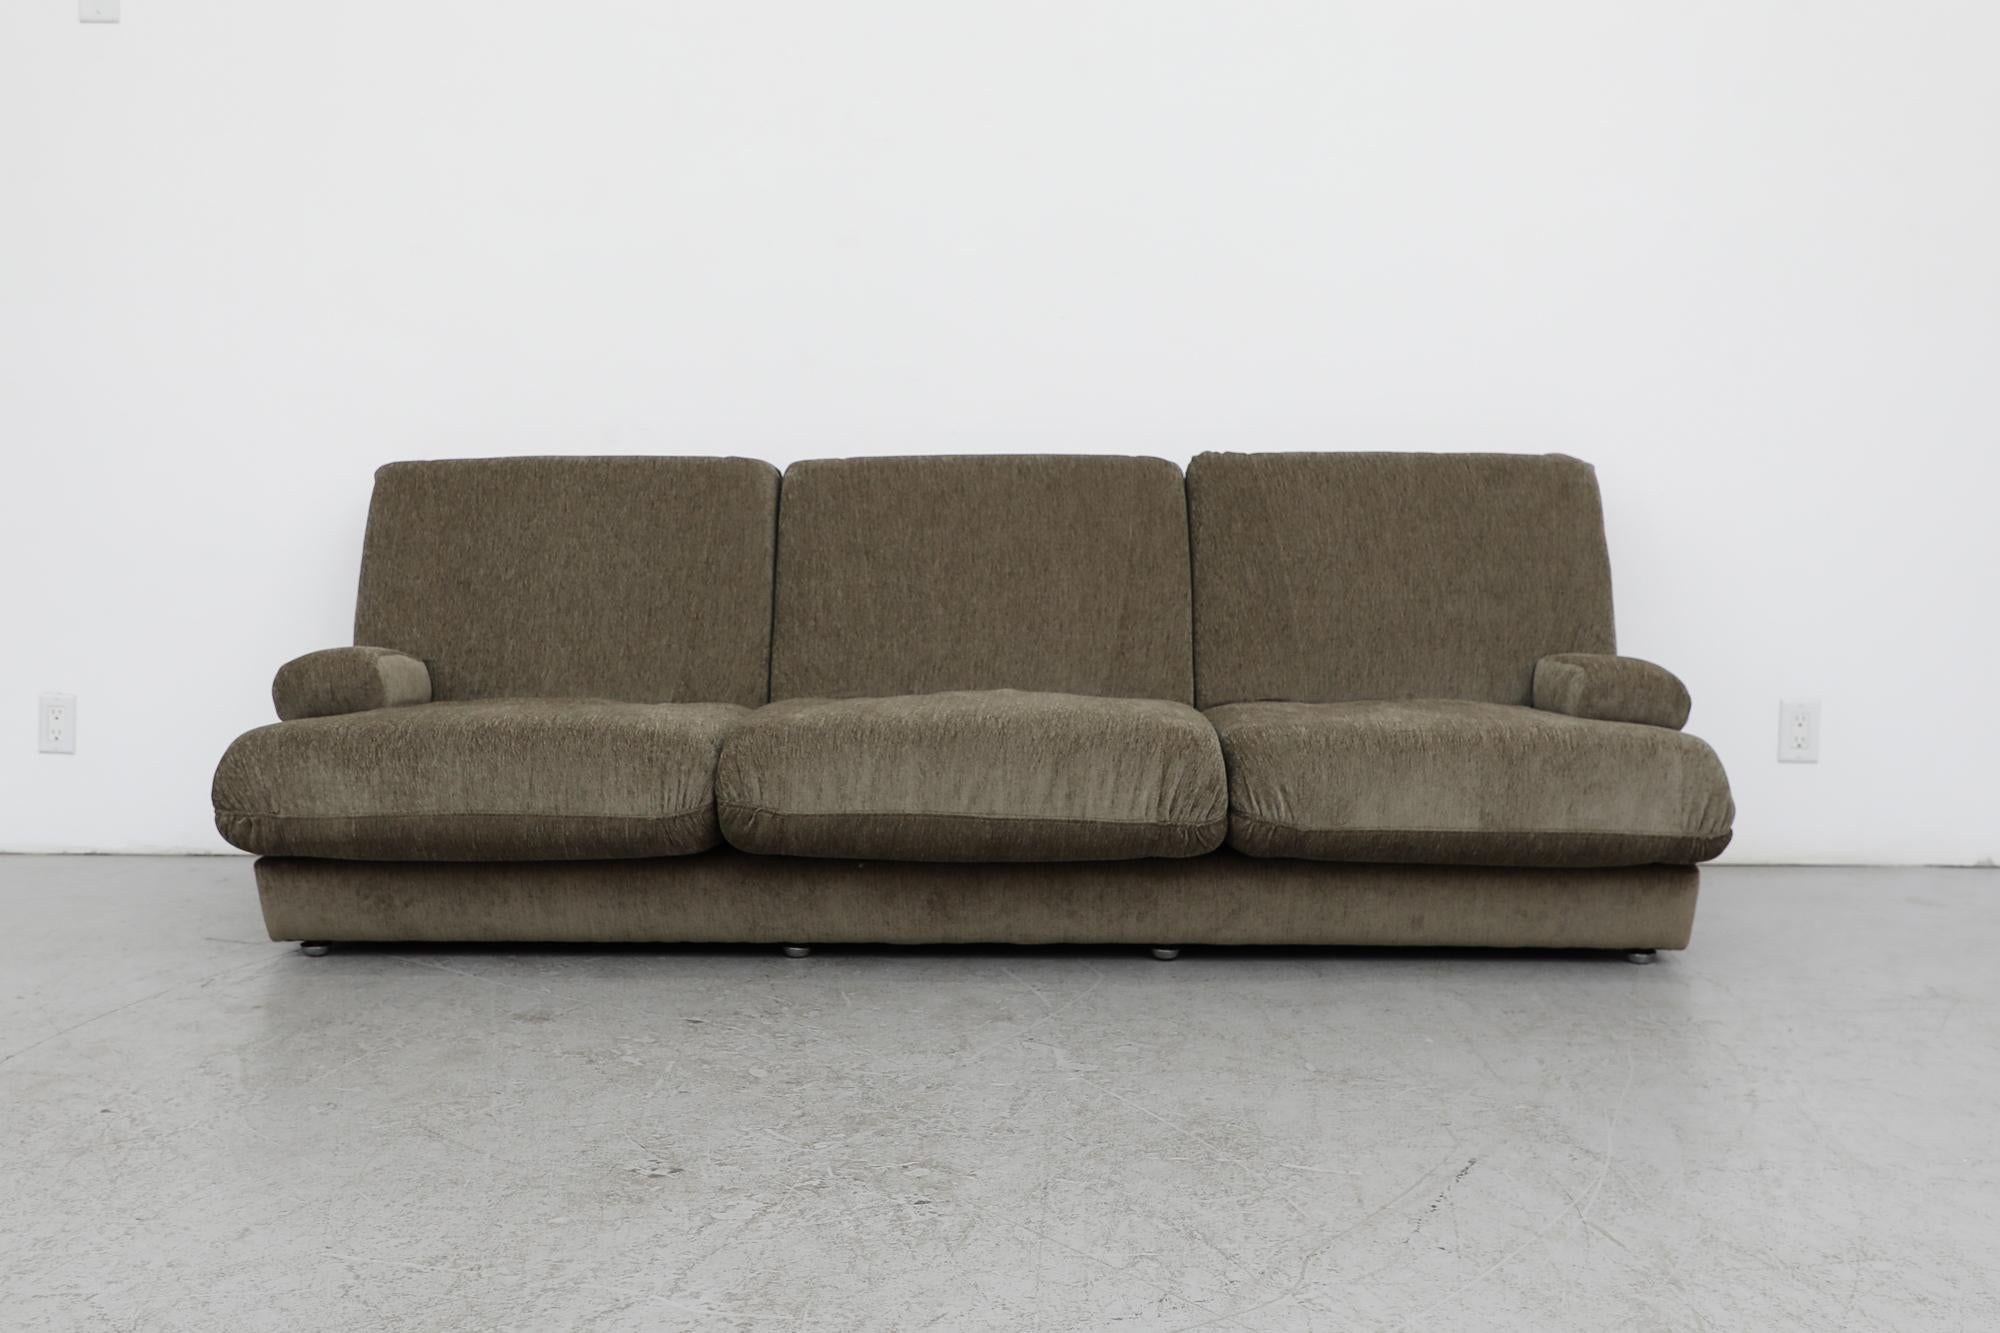 1970's Jacques Charpentier attributed sofa newly upholstered in sage green chenille with stainless steel accented armrests. Similar to Willy Rizzo Sectional Sofa for Mario Sabot. A low and stealth three seater sofa with Francois Monnet style